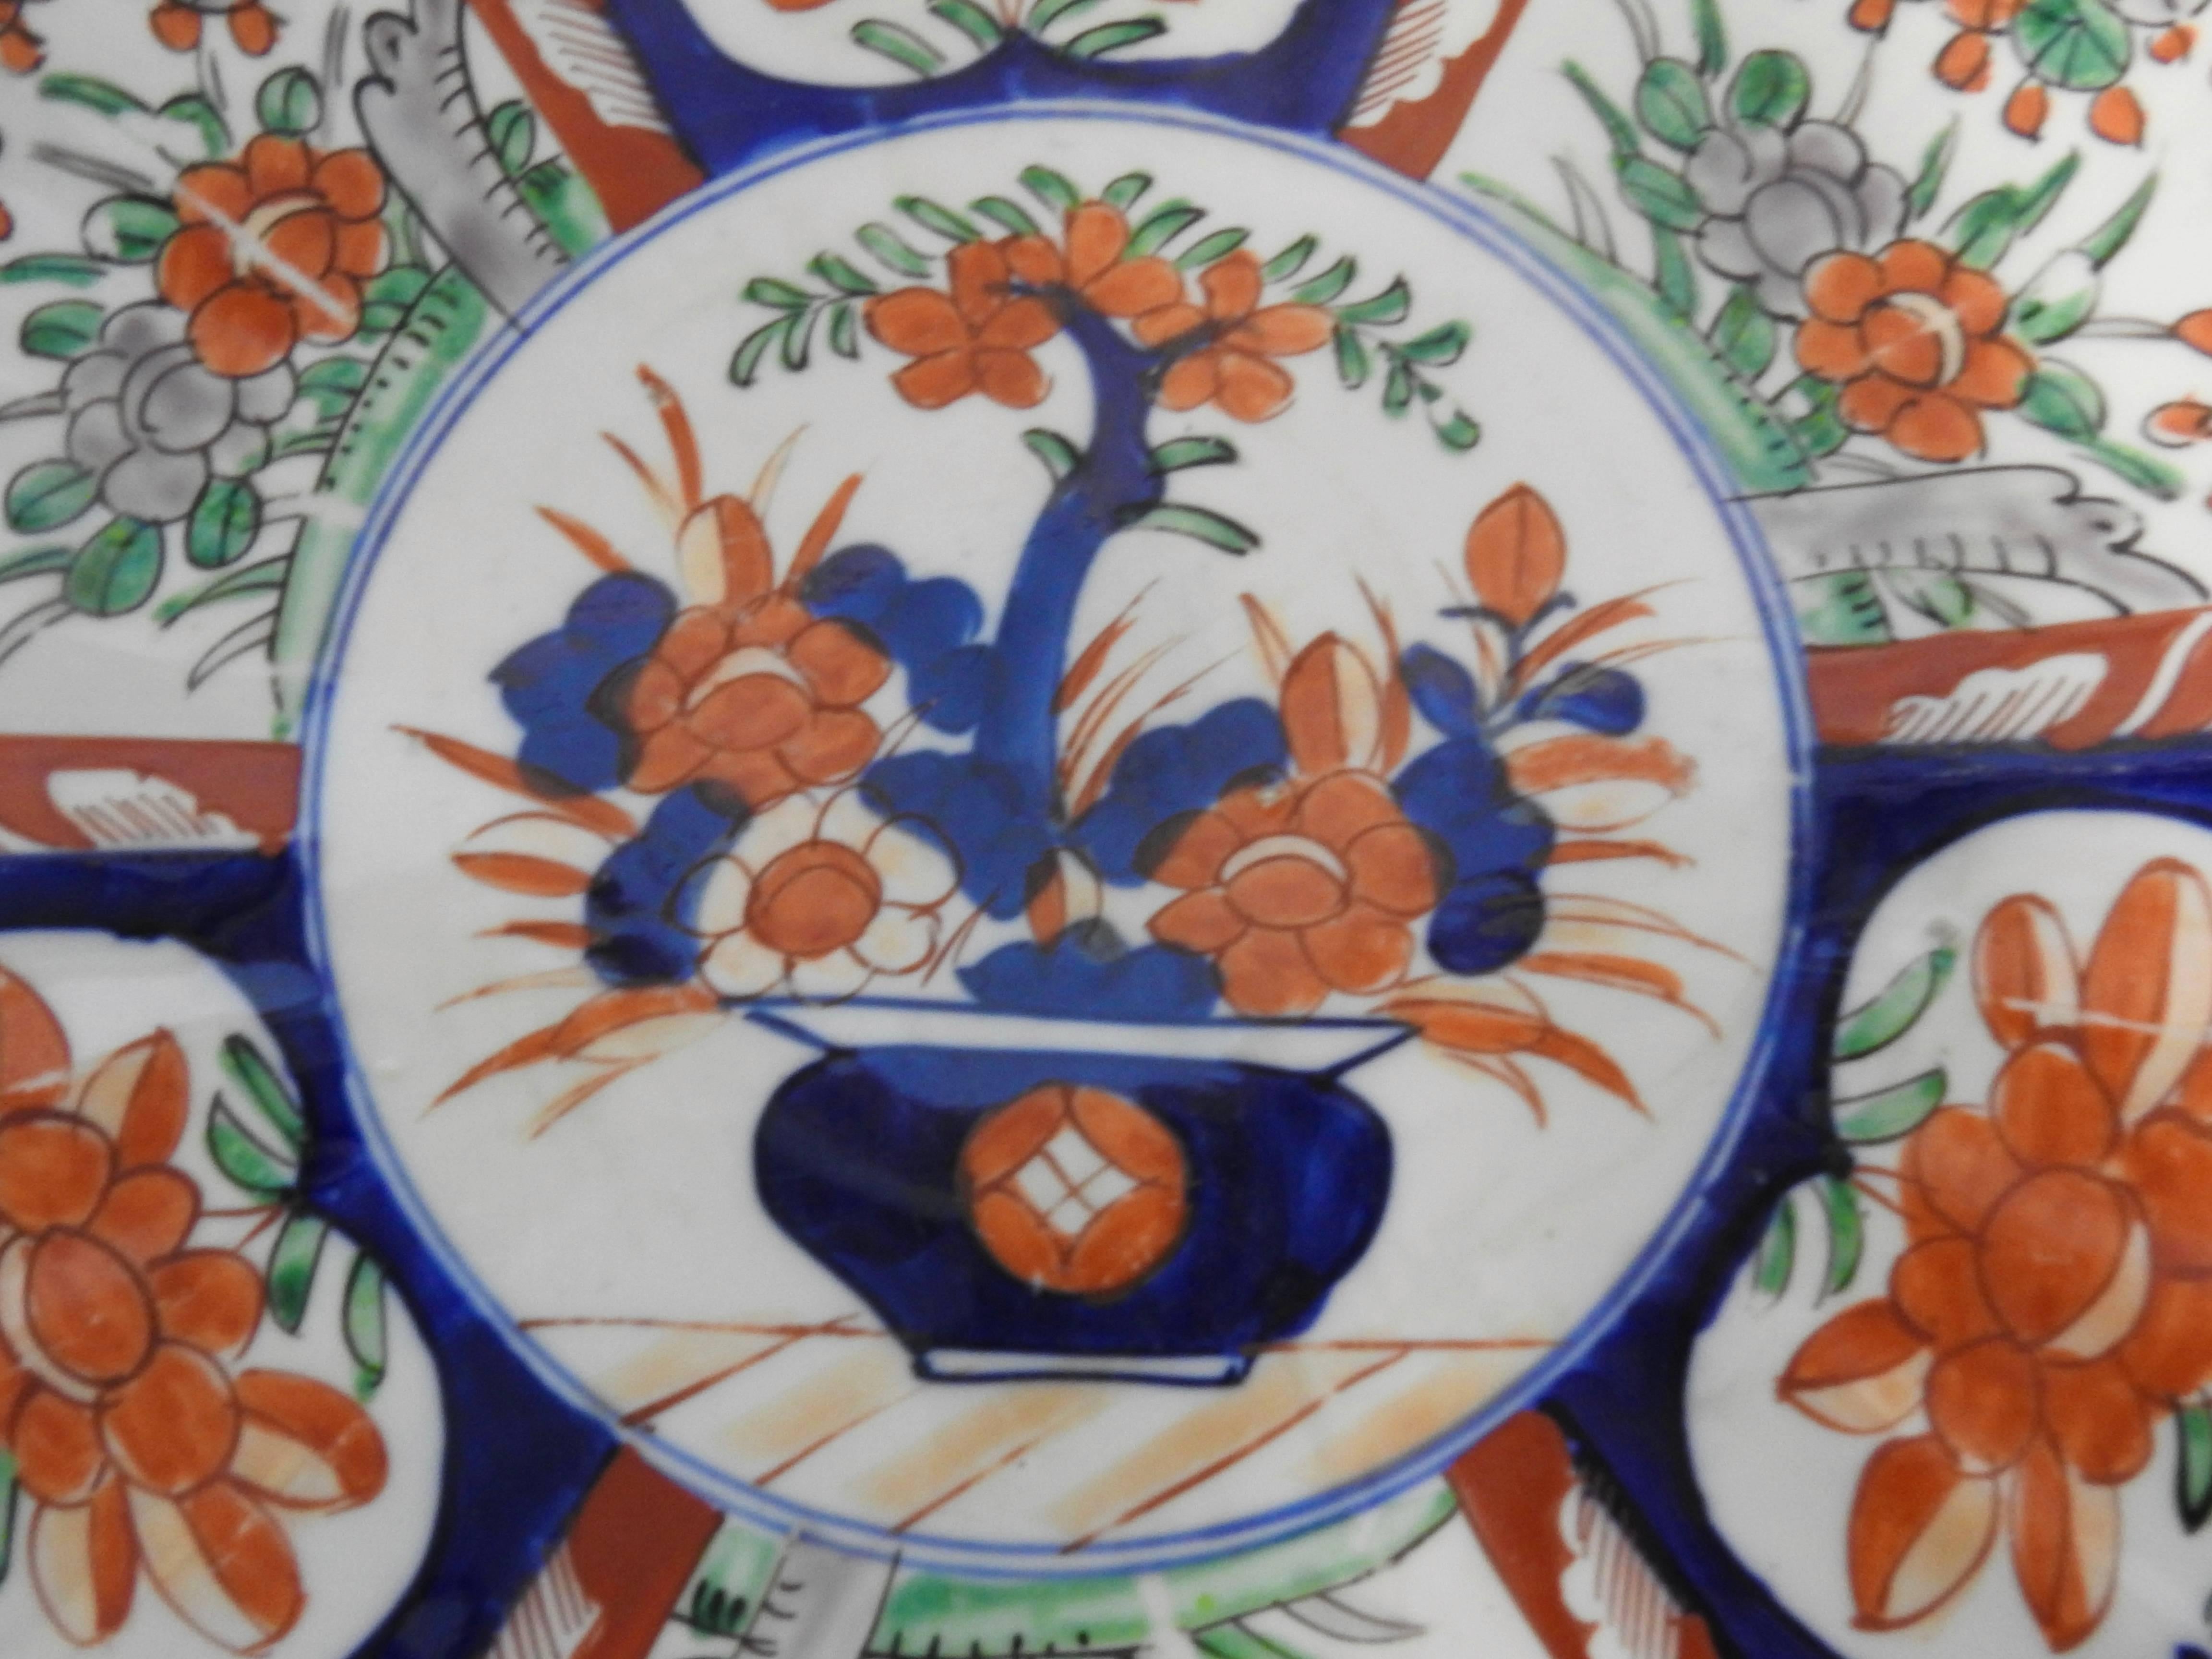 Smooth scalloped edges surround the beauty of this Japanese Imari plate from the early 20th century. Vibrant shades of red, blue and green have been expertly hand painted on the white porcelain. The back of the plate has blue artwork.